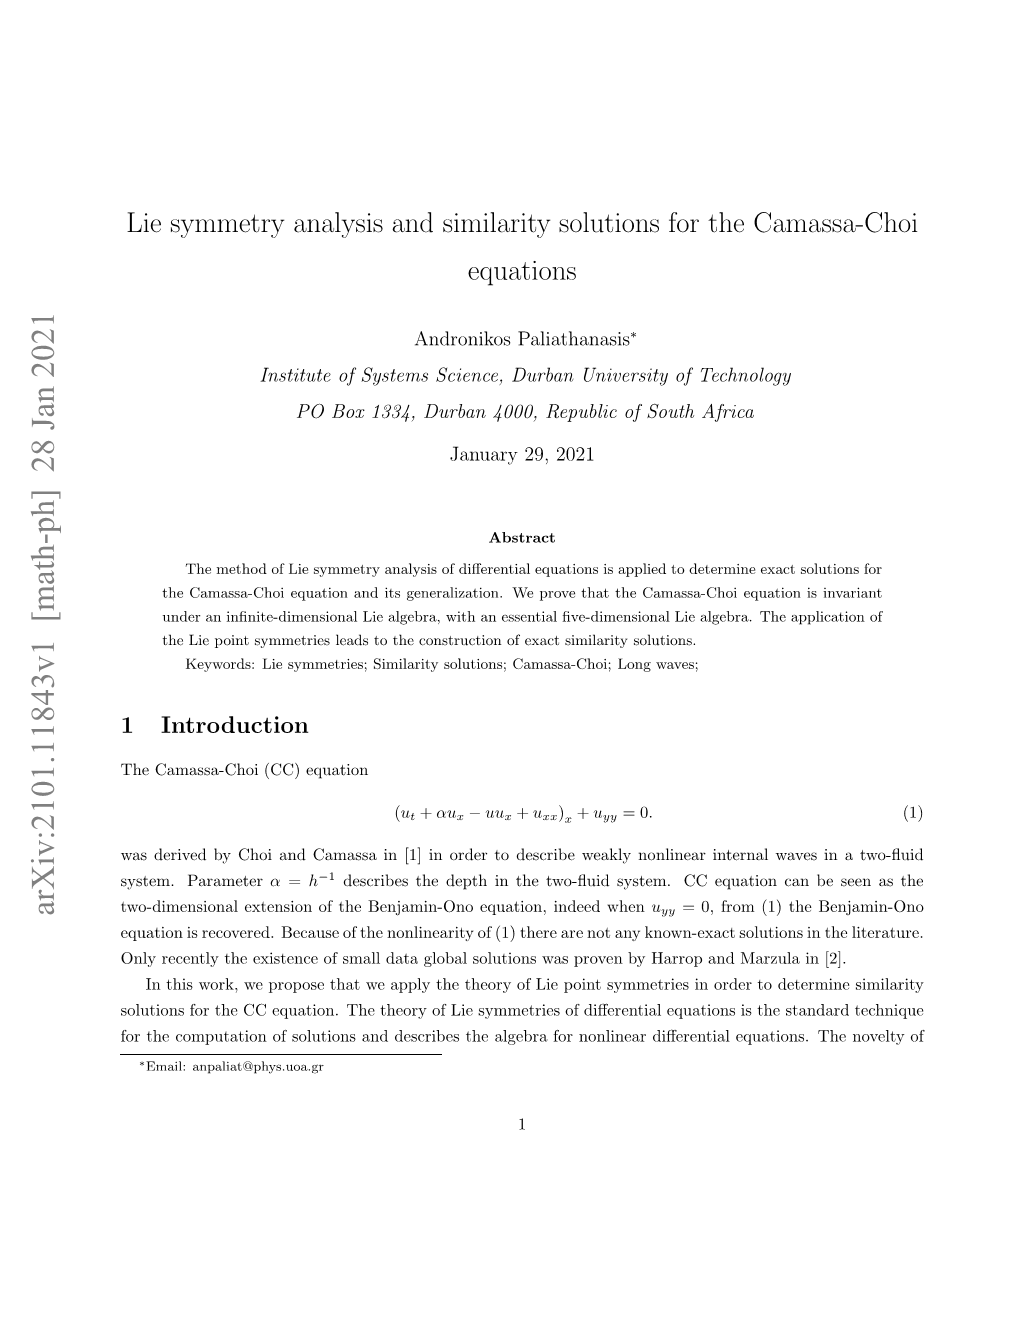 Lie Symmetry Analysis and Similarity Solutions for the Camassa-Choi